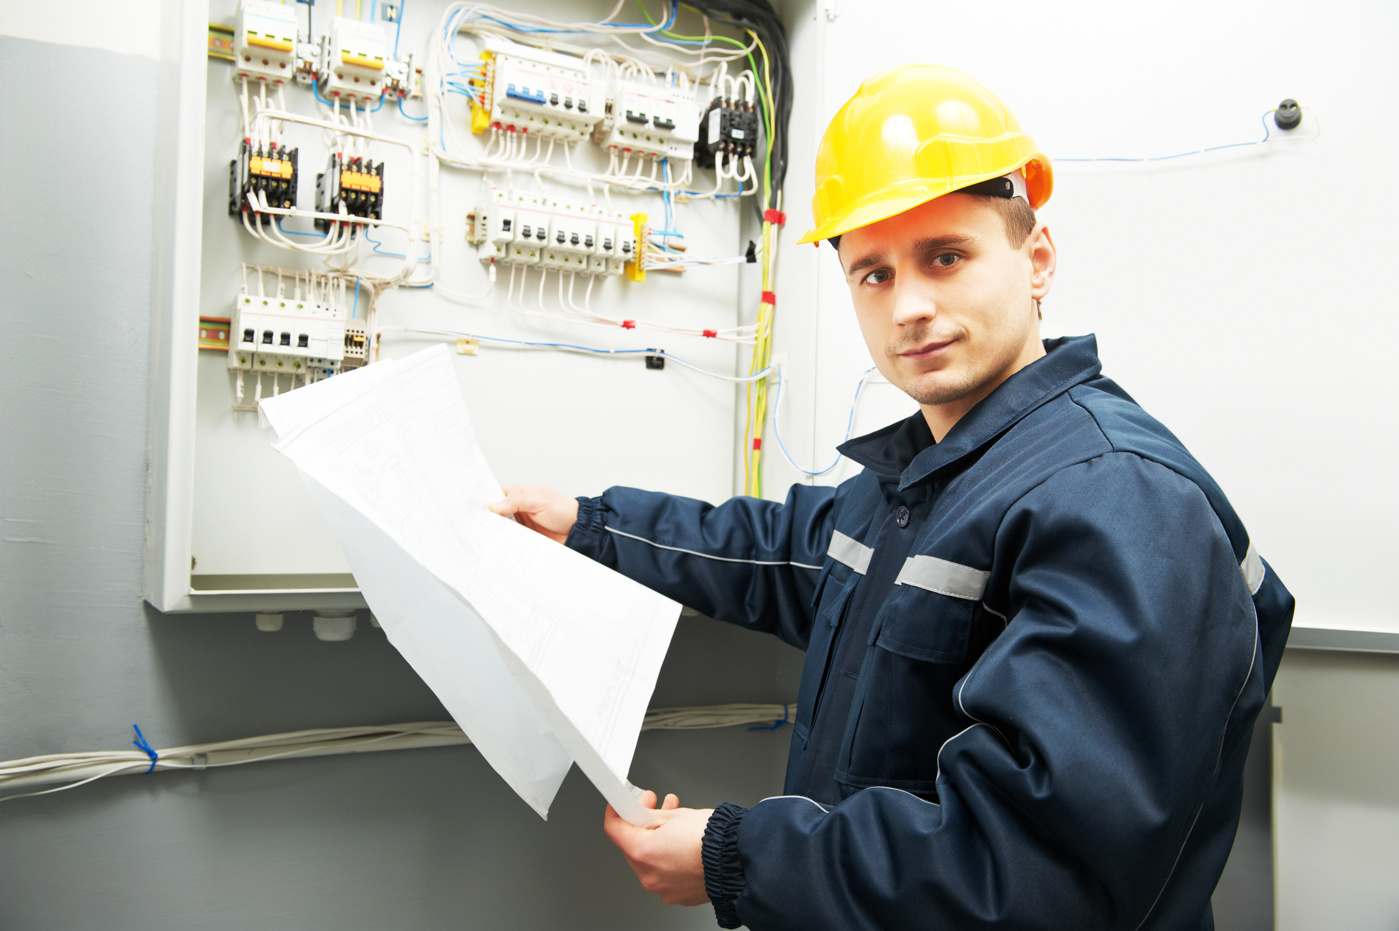 An electrical project manager for installation and safety with a federal certificate inspects an electrical installation in a building.